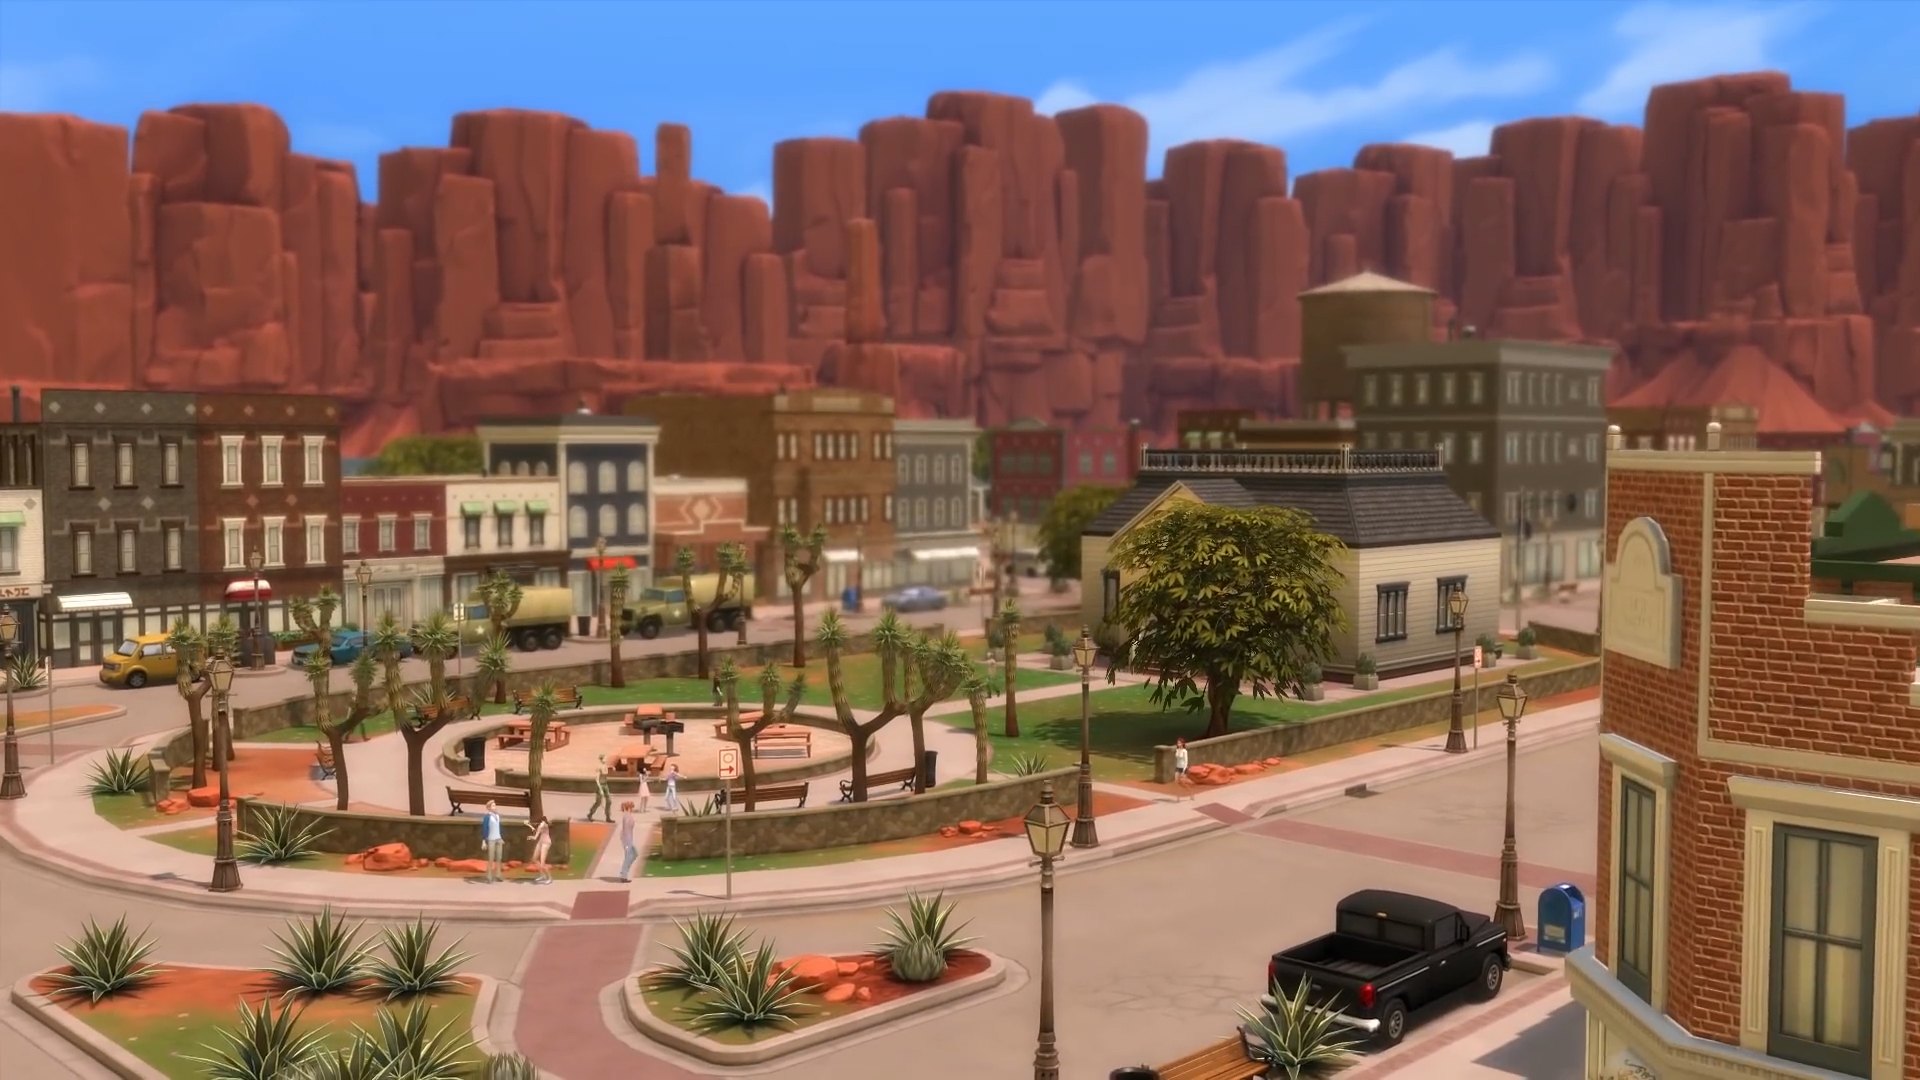 The Sims 4 Strangerville Maqbooster